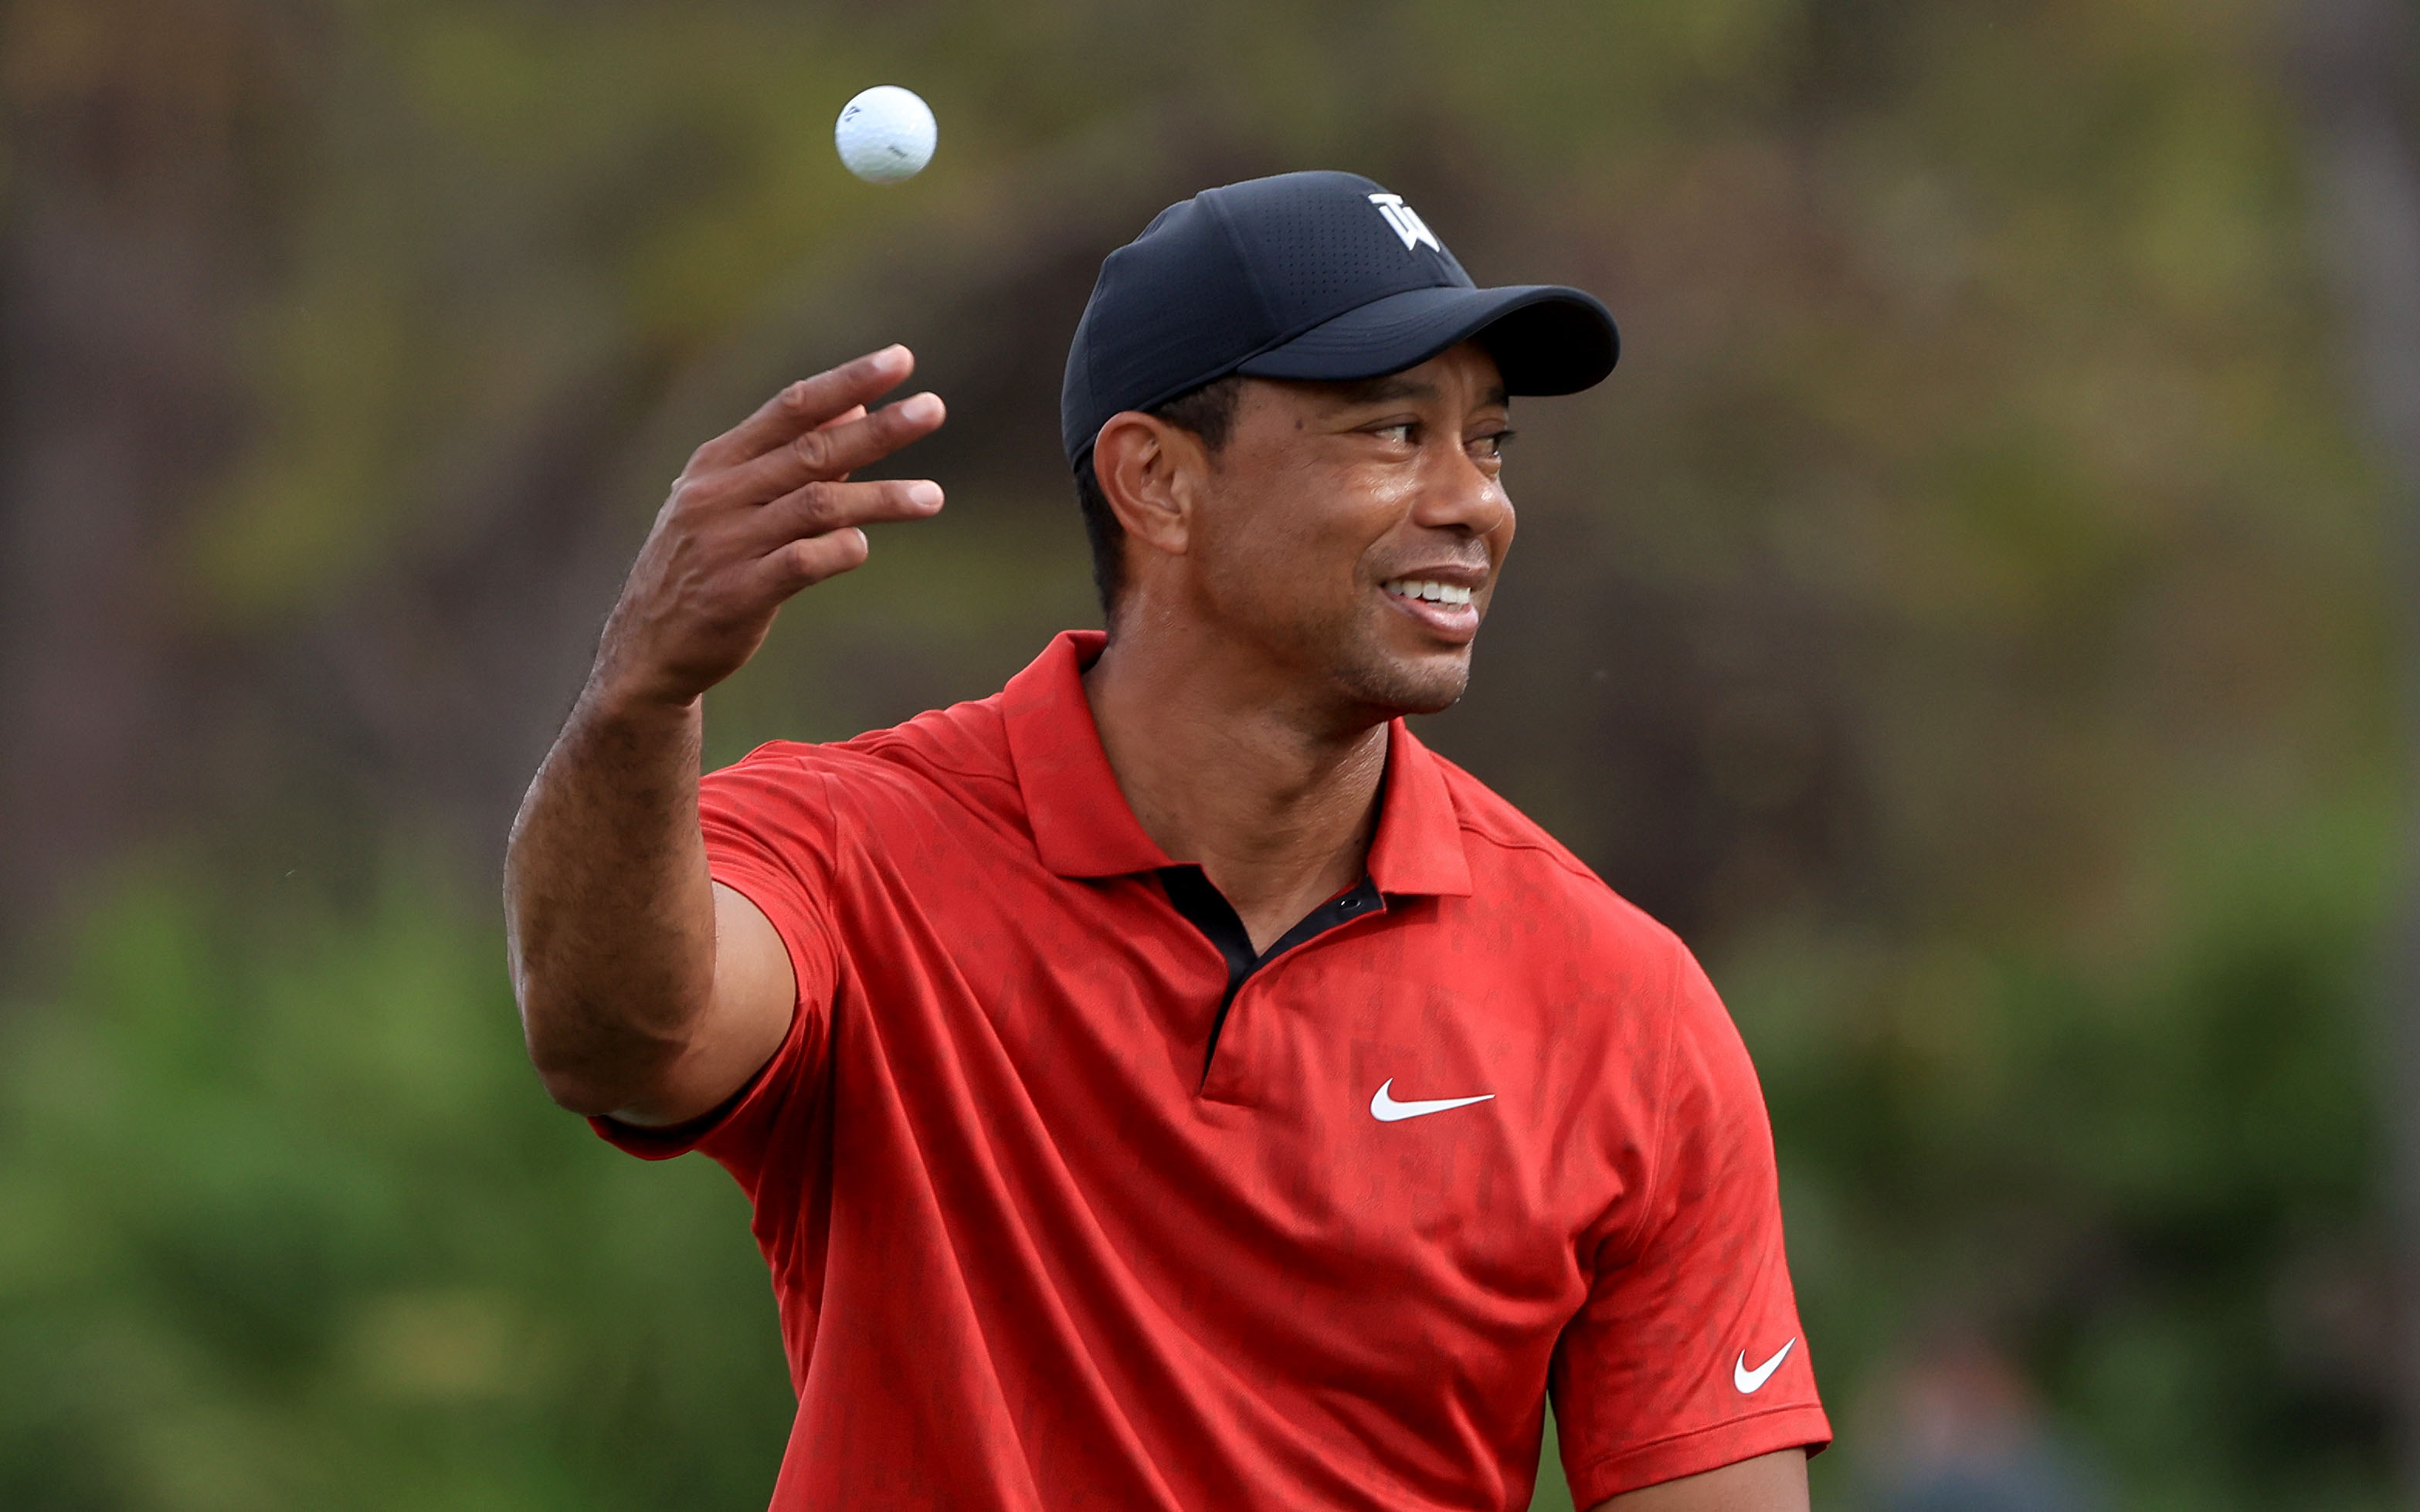 This thread of ridiculous Tiger Woods stats is the perfect way to